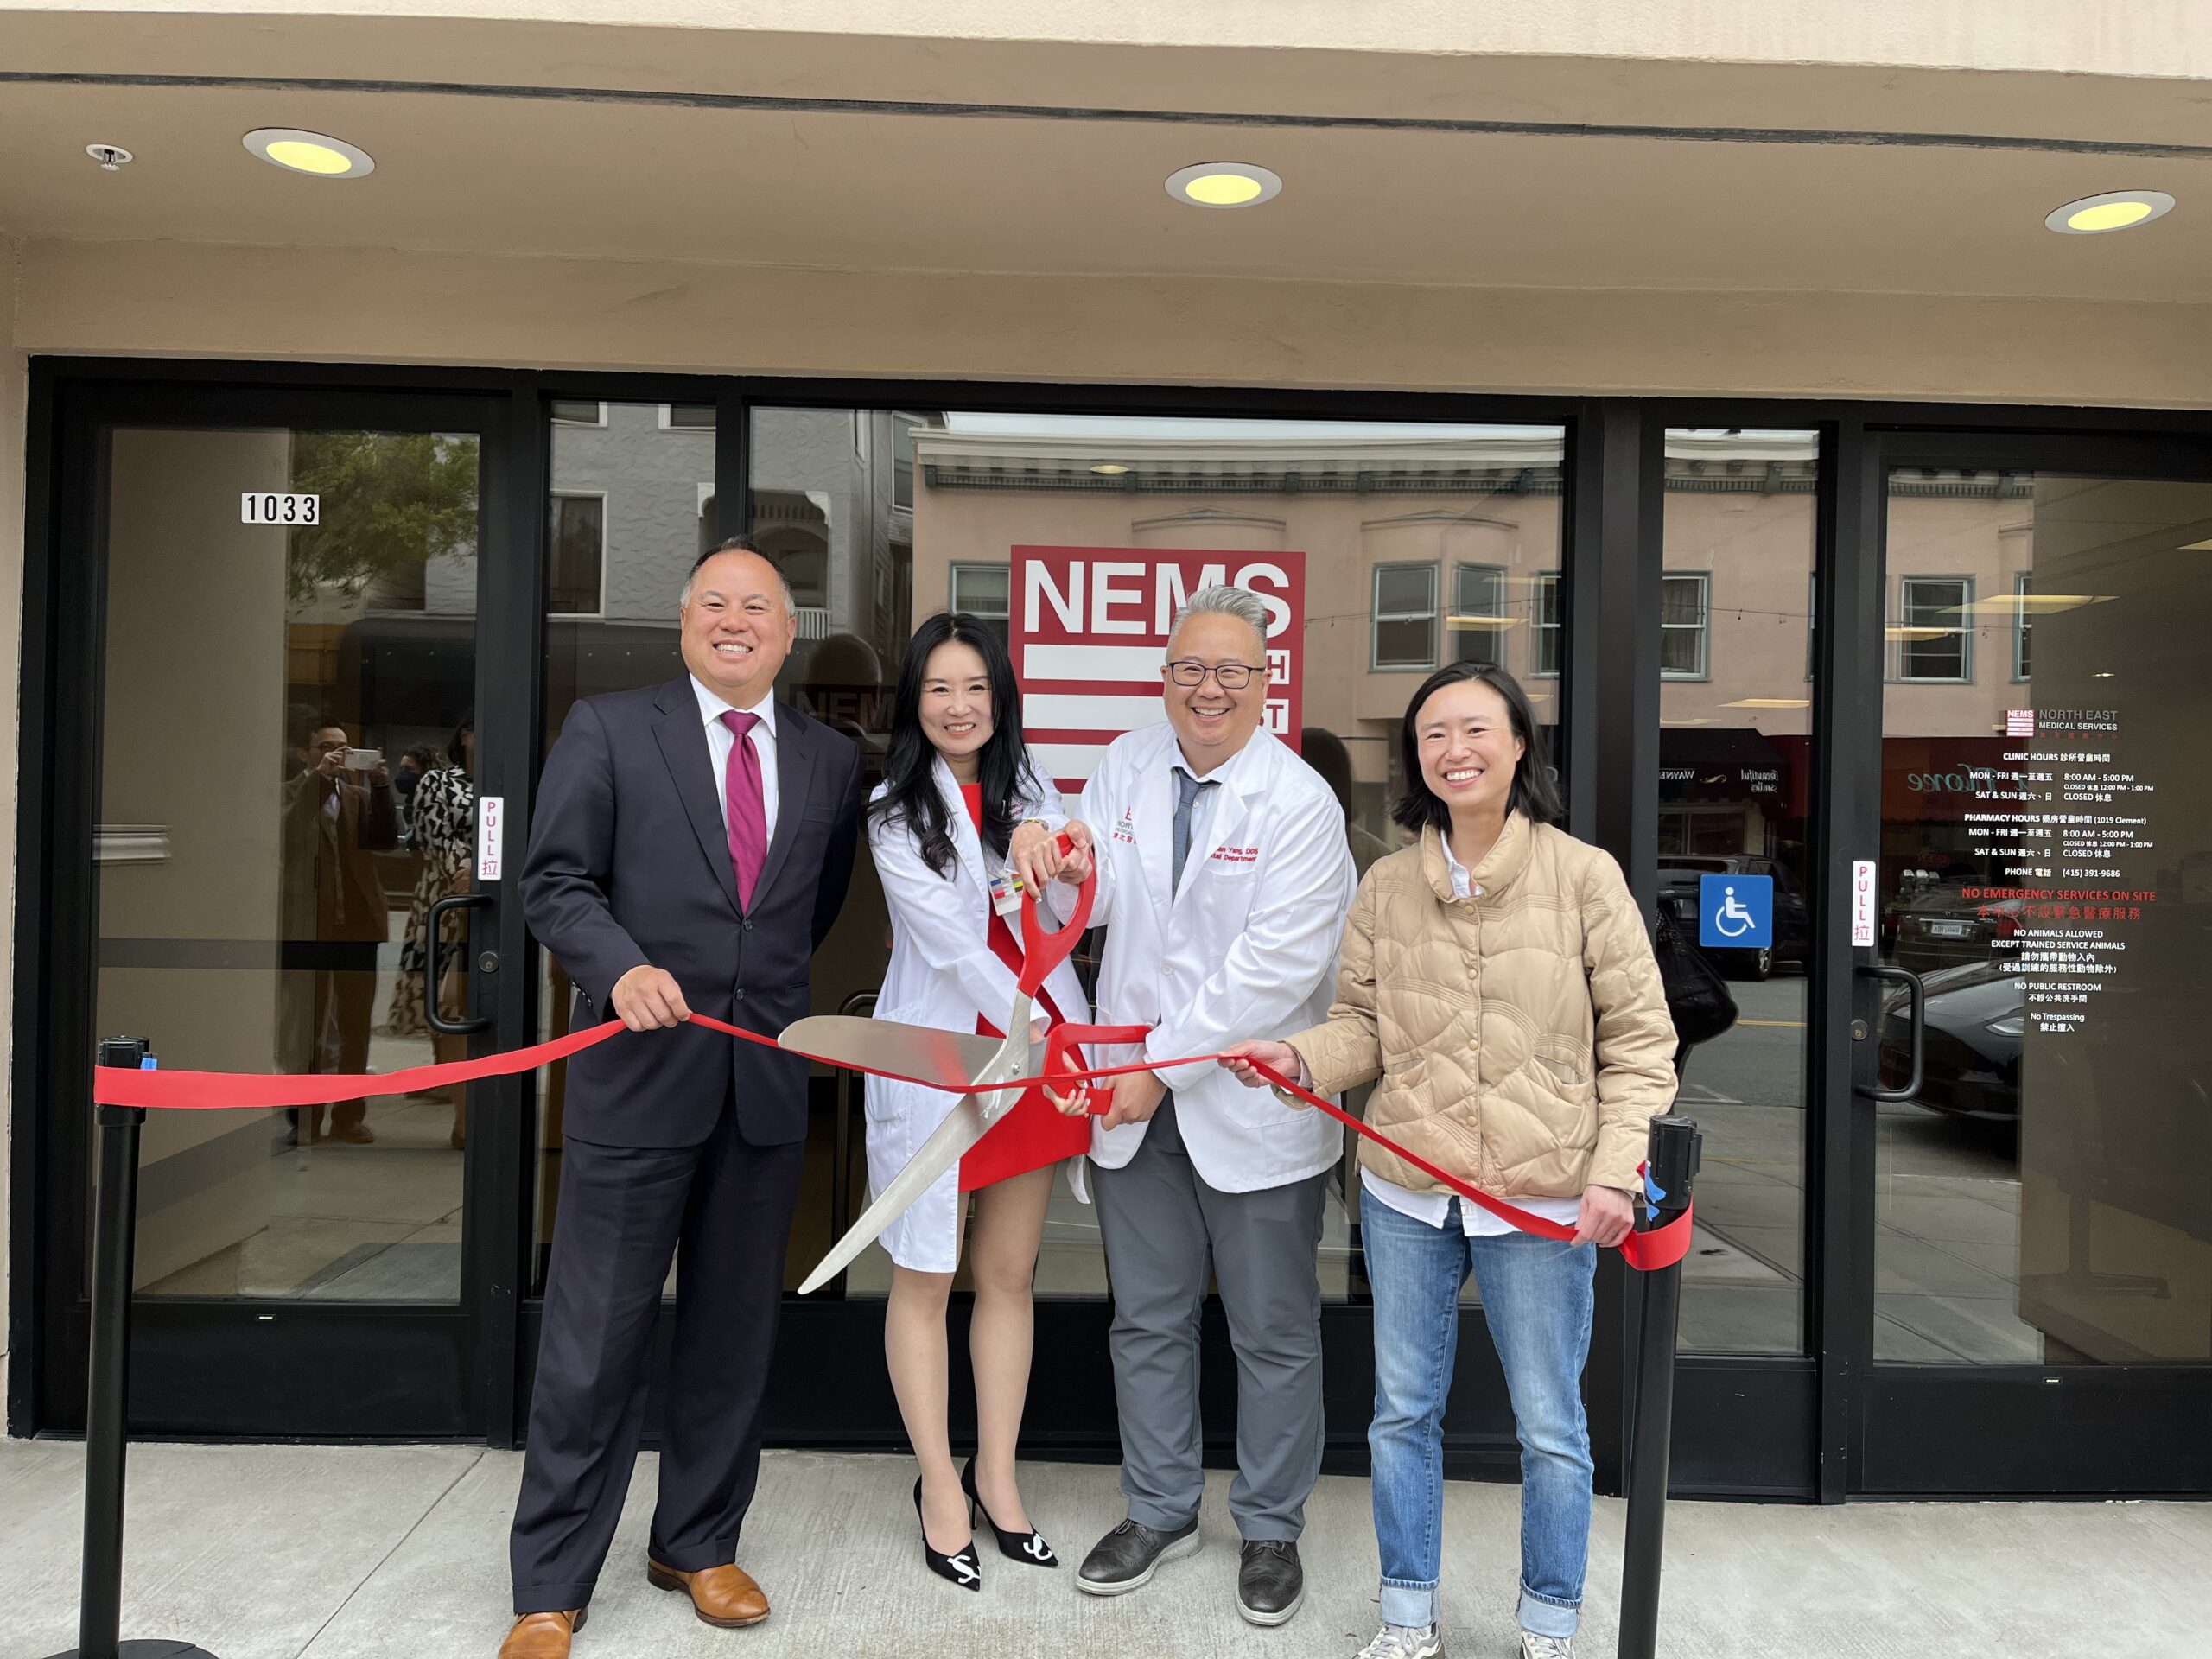 NEMS Expands Dental and Acupuncture Services at 1033 Clement Clinic